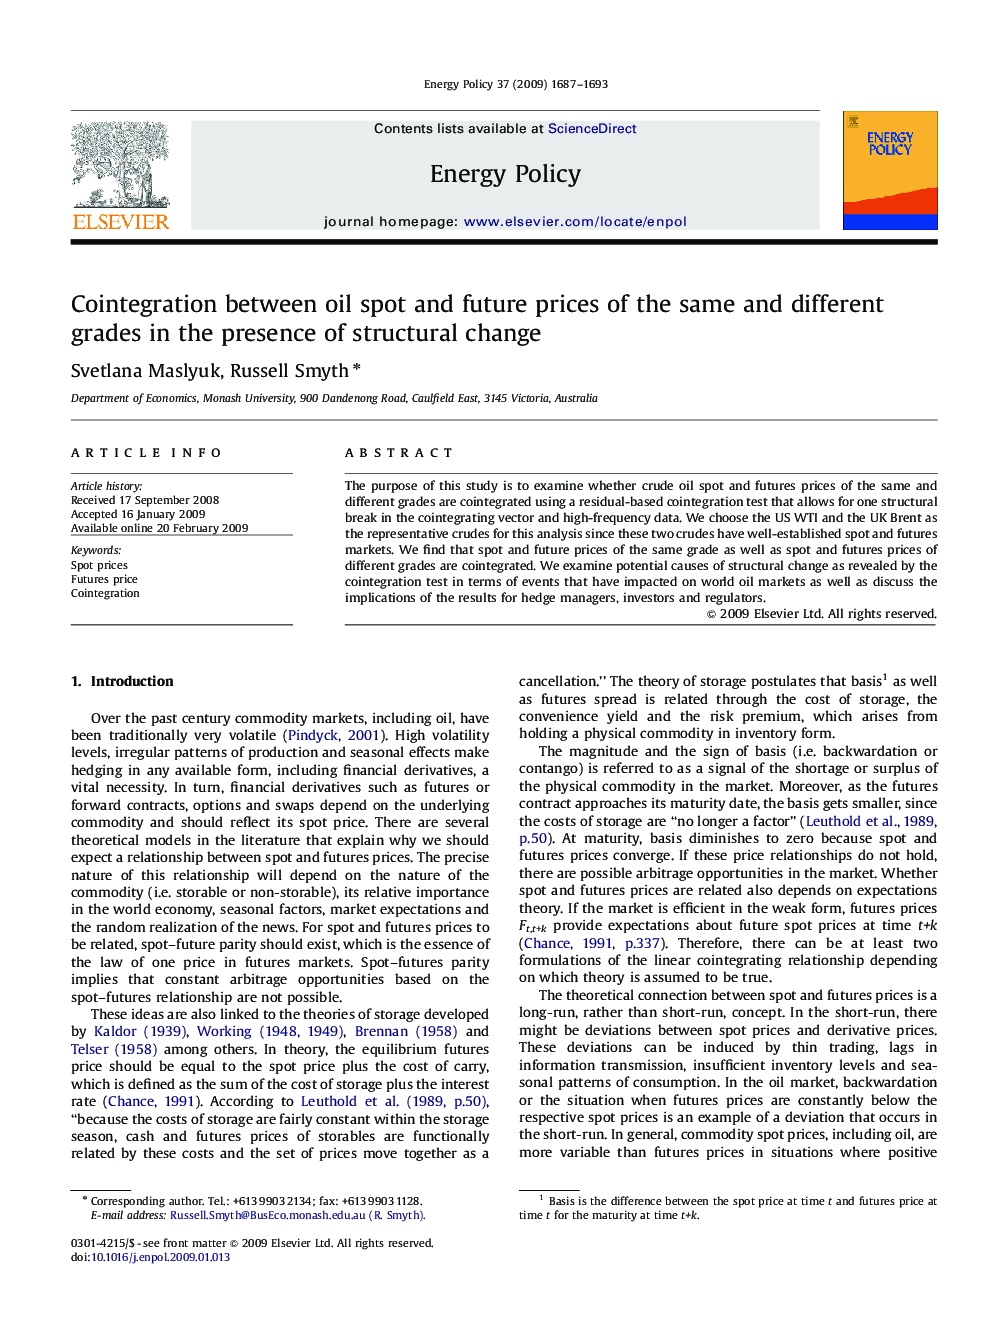 Cointegration between oil spot and future prices of the same and different grades in the presence of structural change